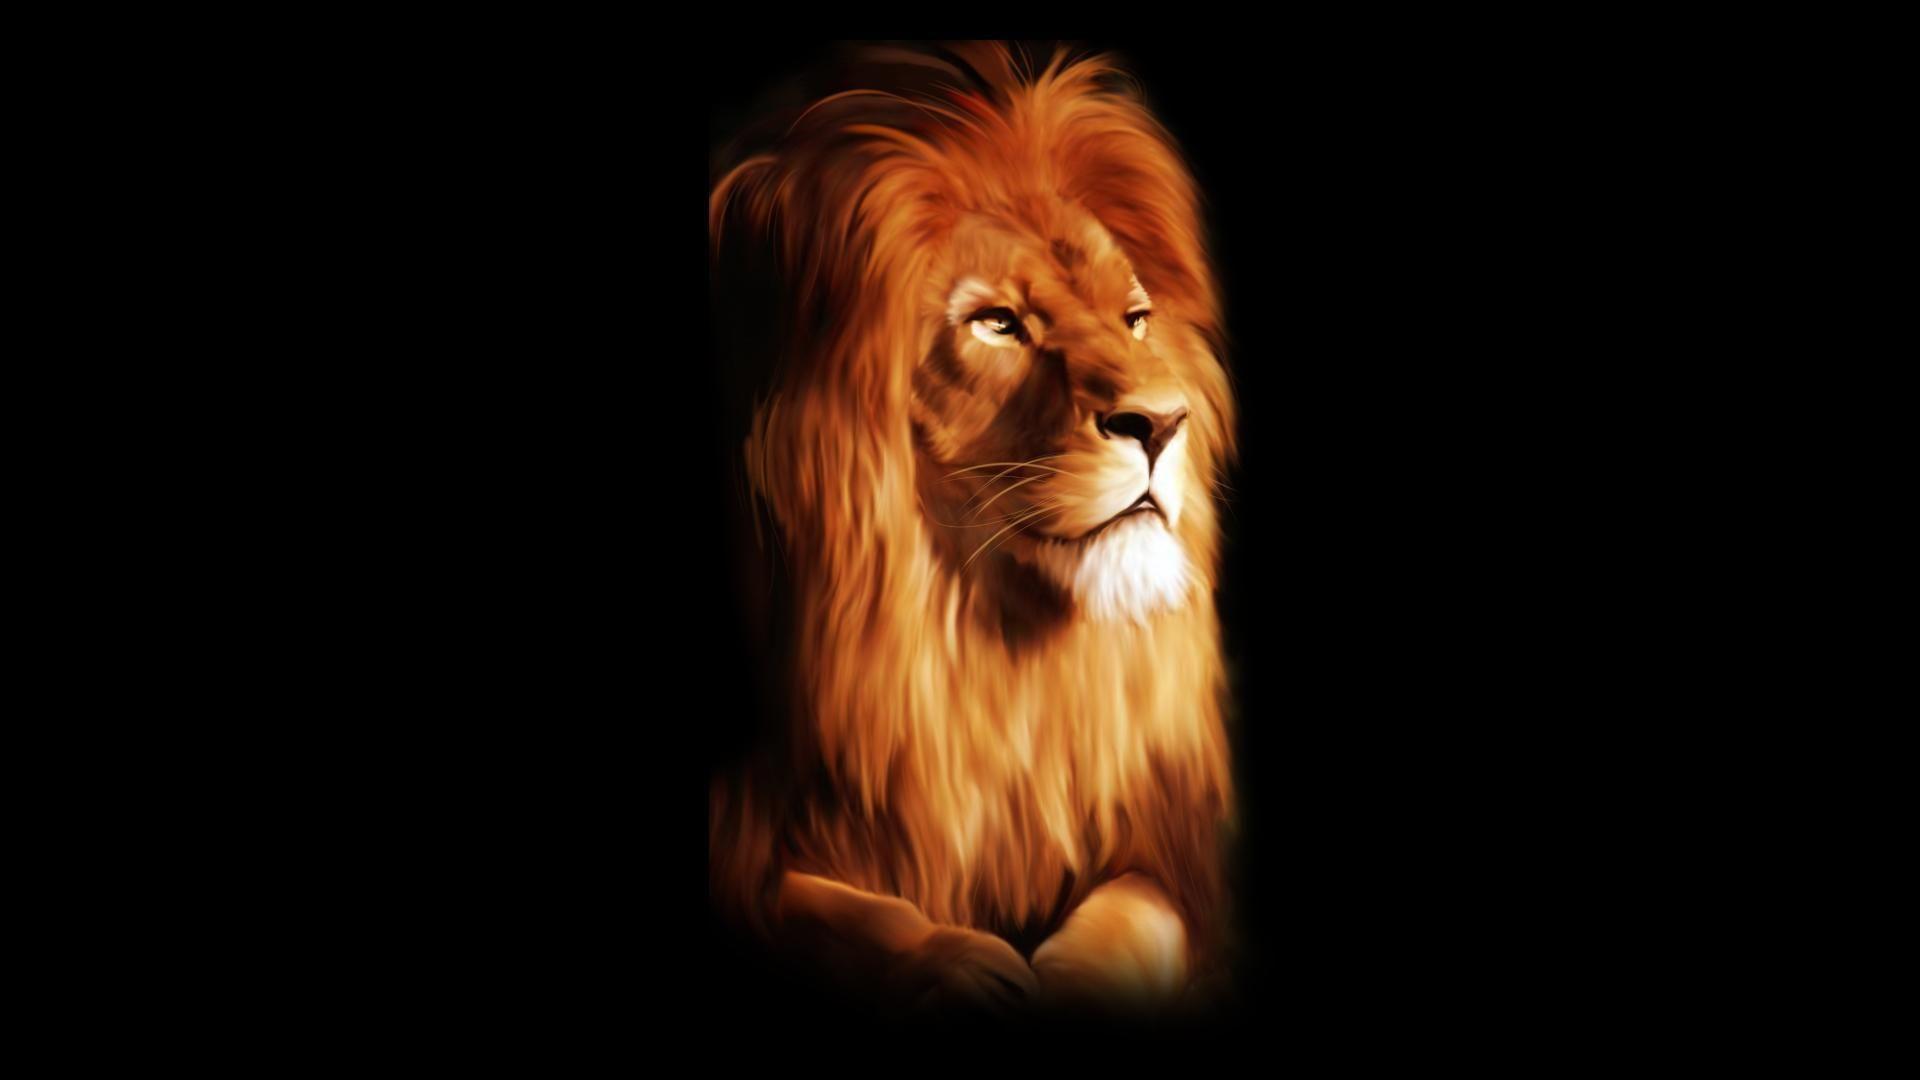 Dangerous & Angry Lion image. Beautiful image HD Picture